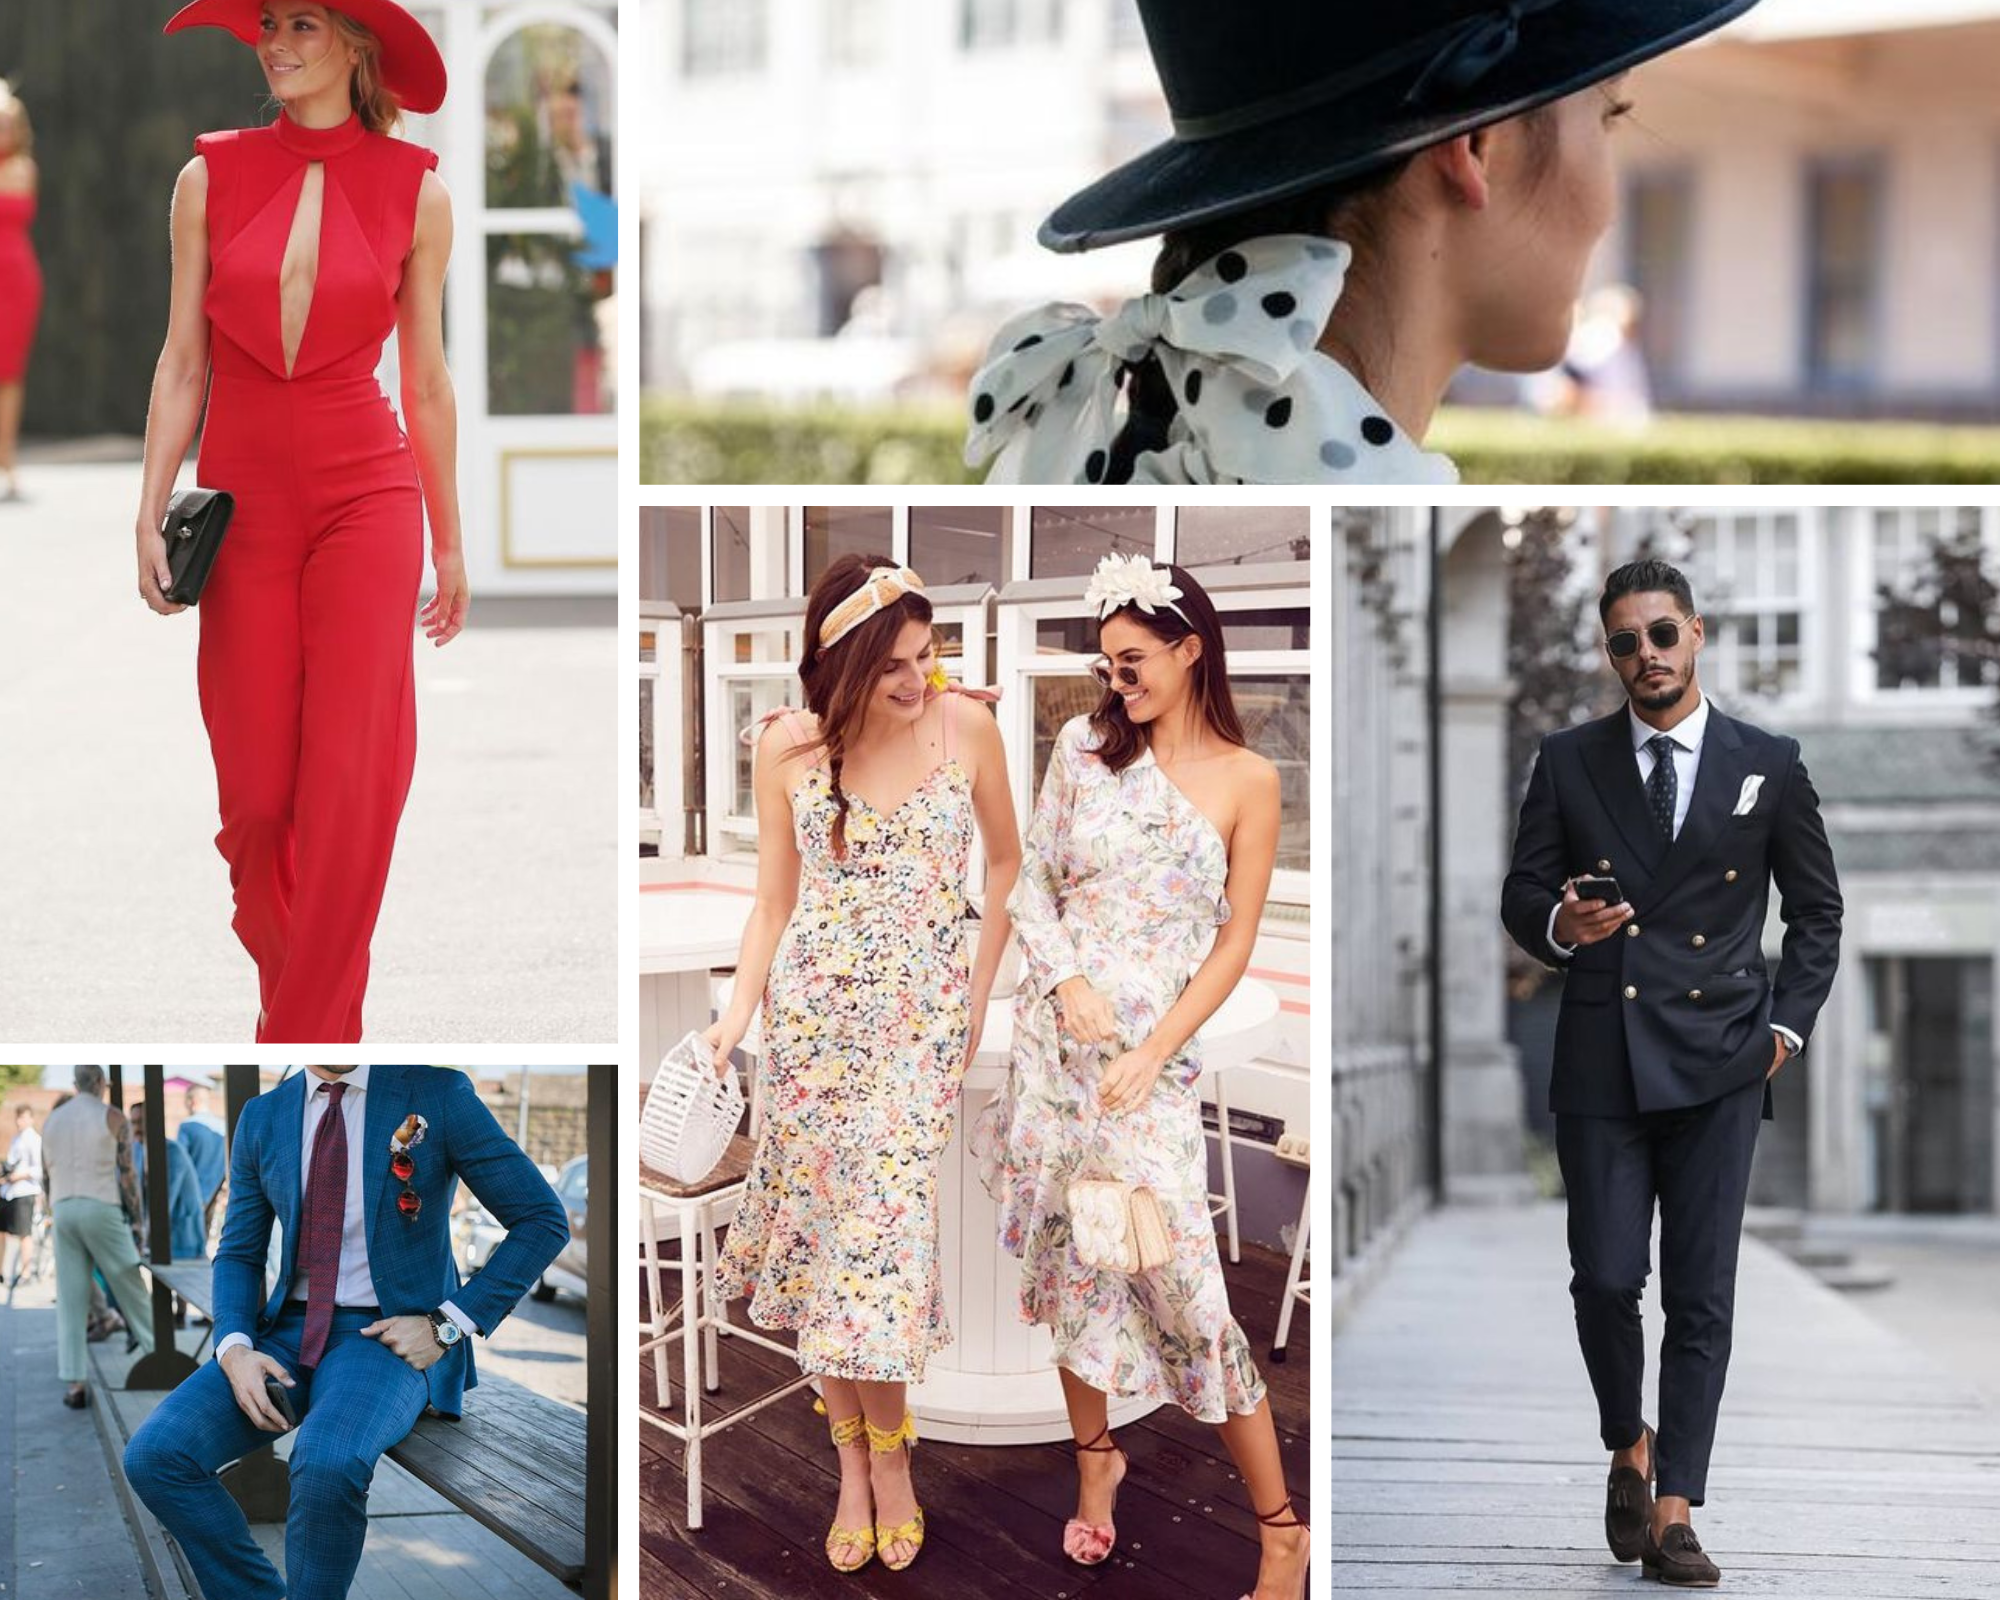 Melbourne Cup Carnival fashion - red jumpsuit - floral dress - suit and tie - hat - polka dots - men and women